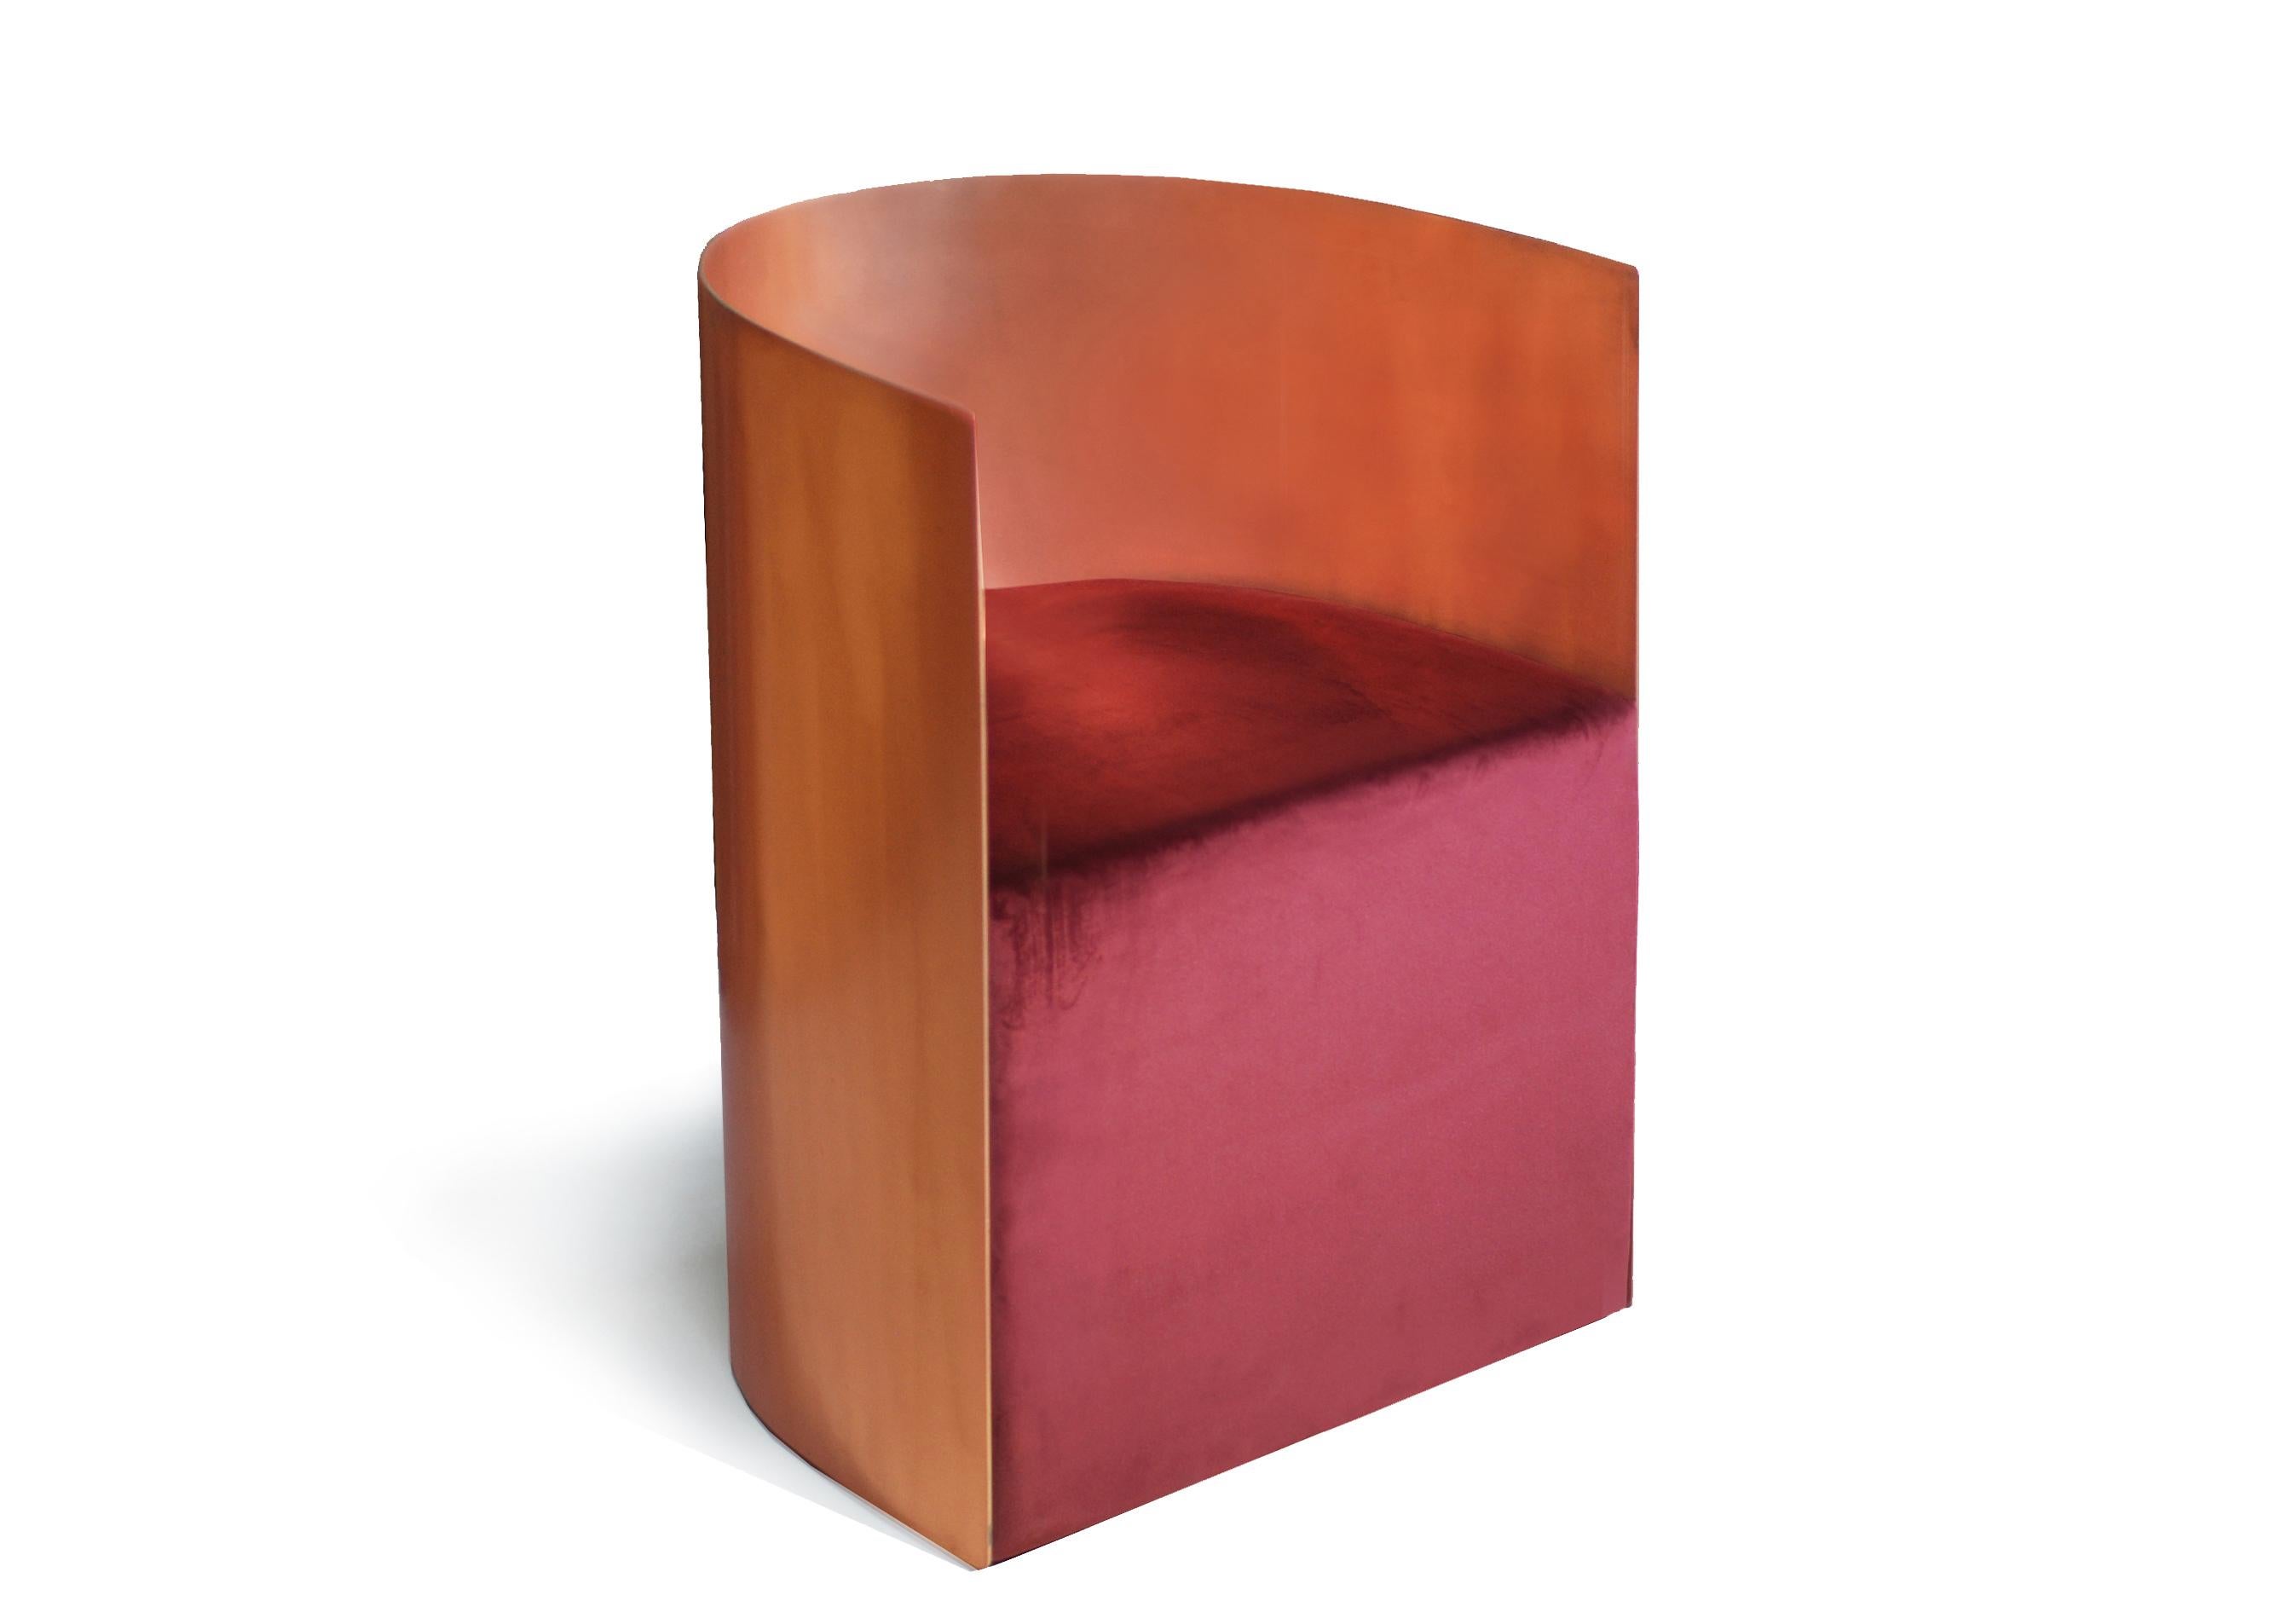 Luna Chair by ZAROLAT 
Dimensions: D 40 x W 50 x H 70 cm. 
Seat height: 40 cm.
Materials: Copper in matte finish and velvet fabric.

Luna Chair is a glorious sculpture to sit on. With its simple form in contrast with its bold color and materials, it